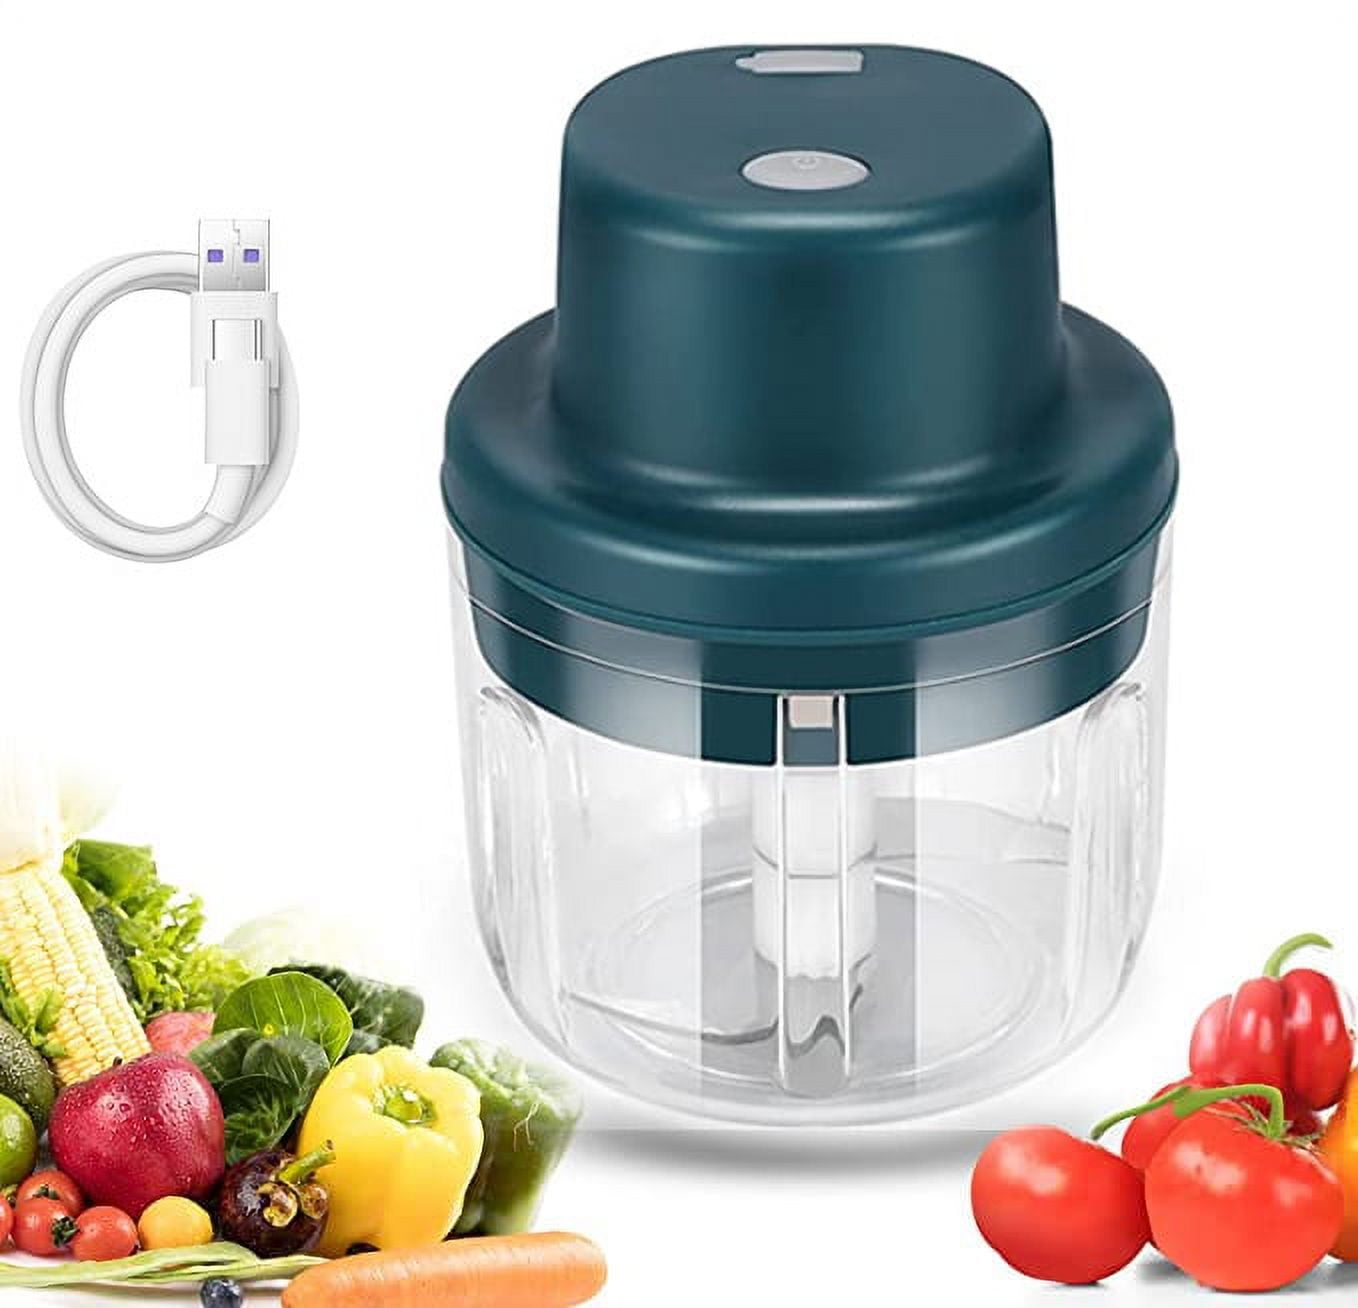 Pudhoms Electric Mini Garlic Chopper Small Wireless Food Processor Portable  Mini Garlic Choppers Blender Mincer Waterproof USB Charging For Ginger Onion  Vegetable Meat Nut Chopper (150+250 ml Bowl) 